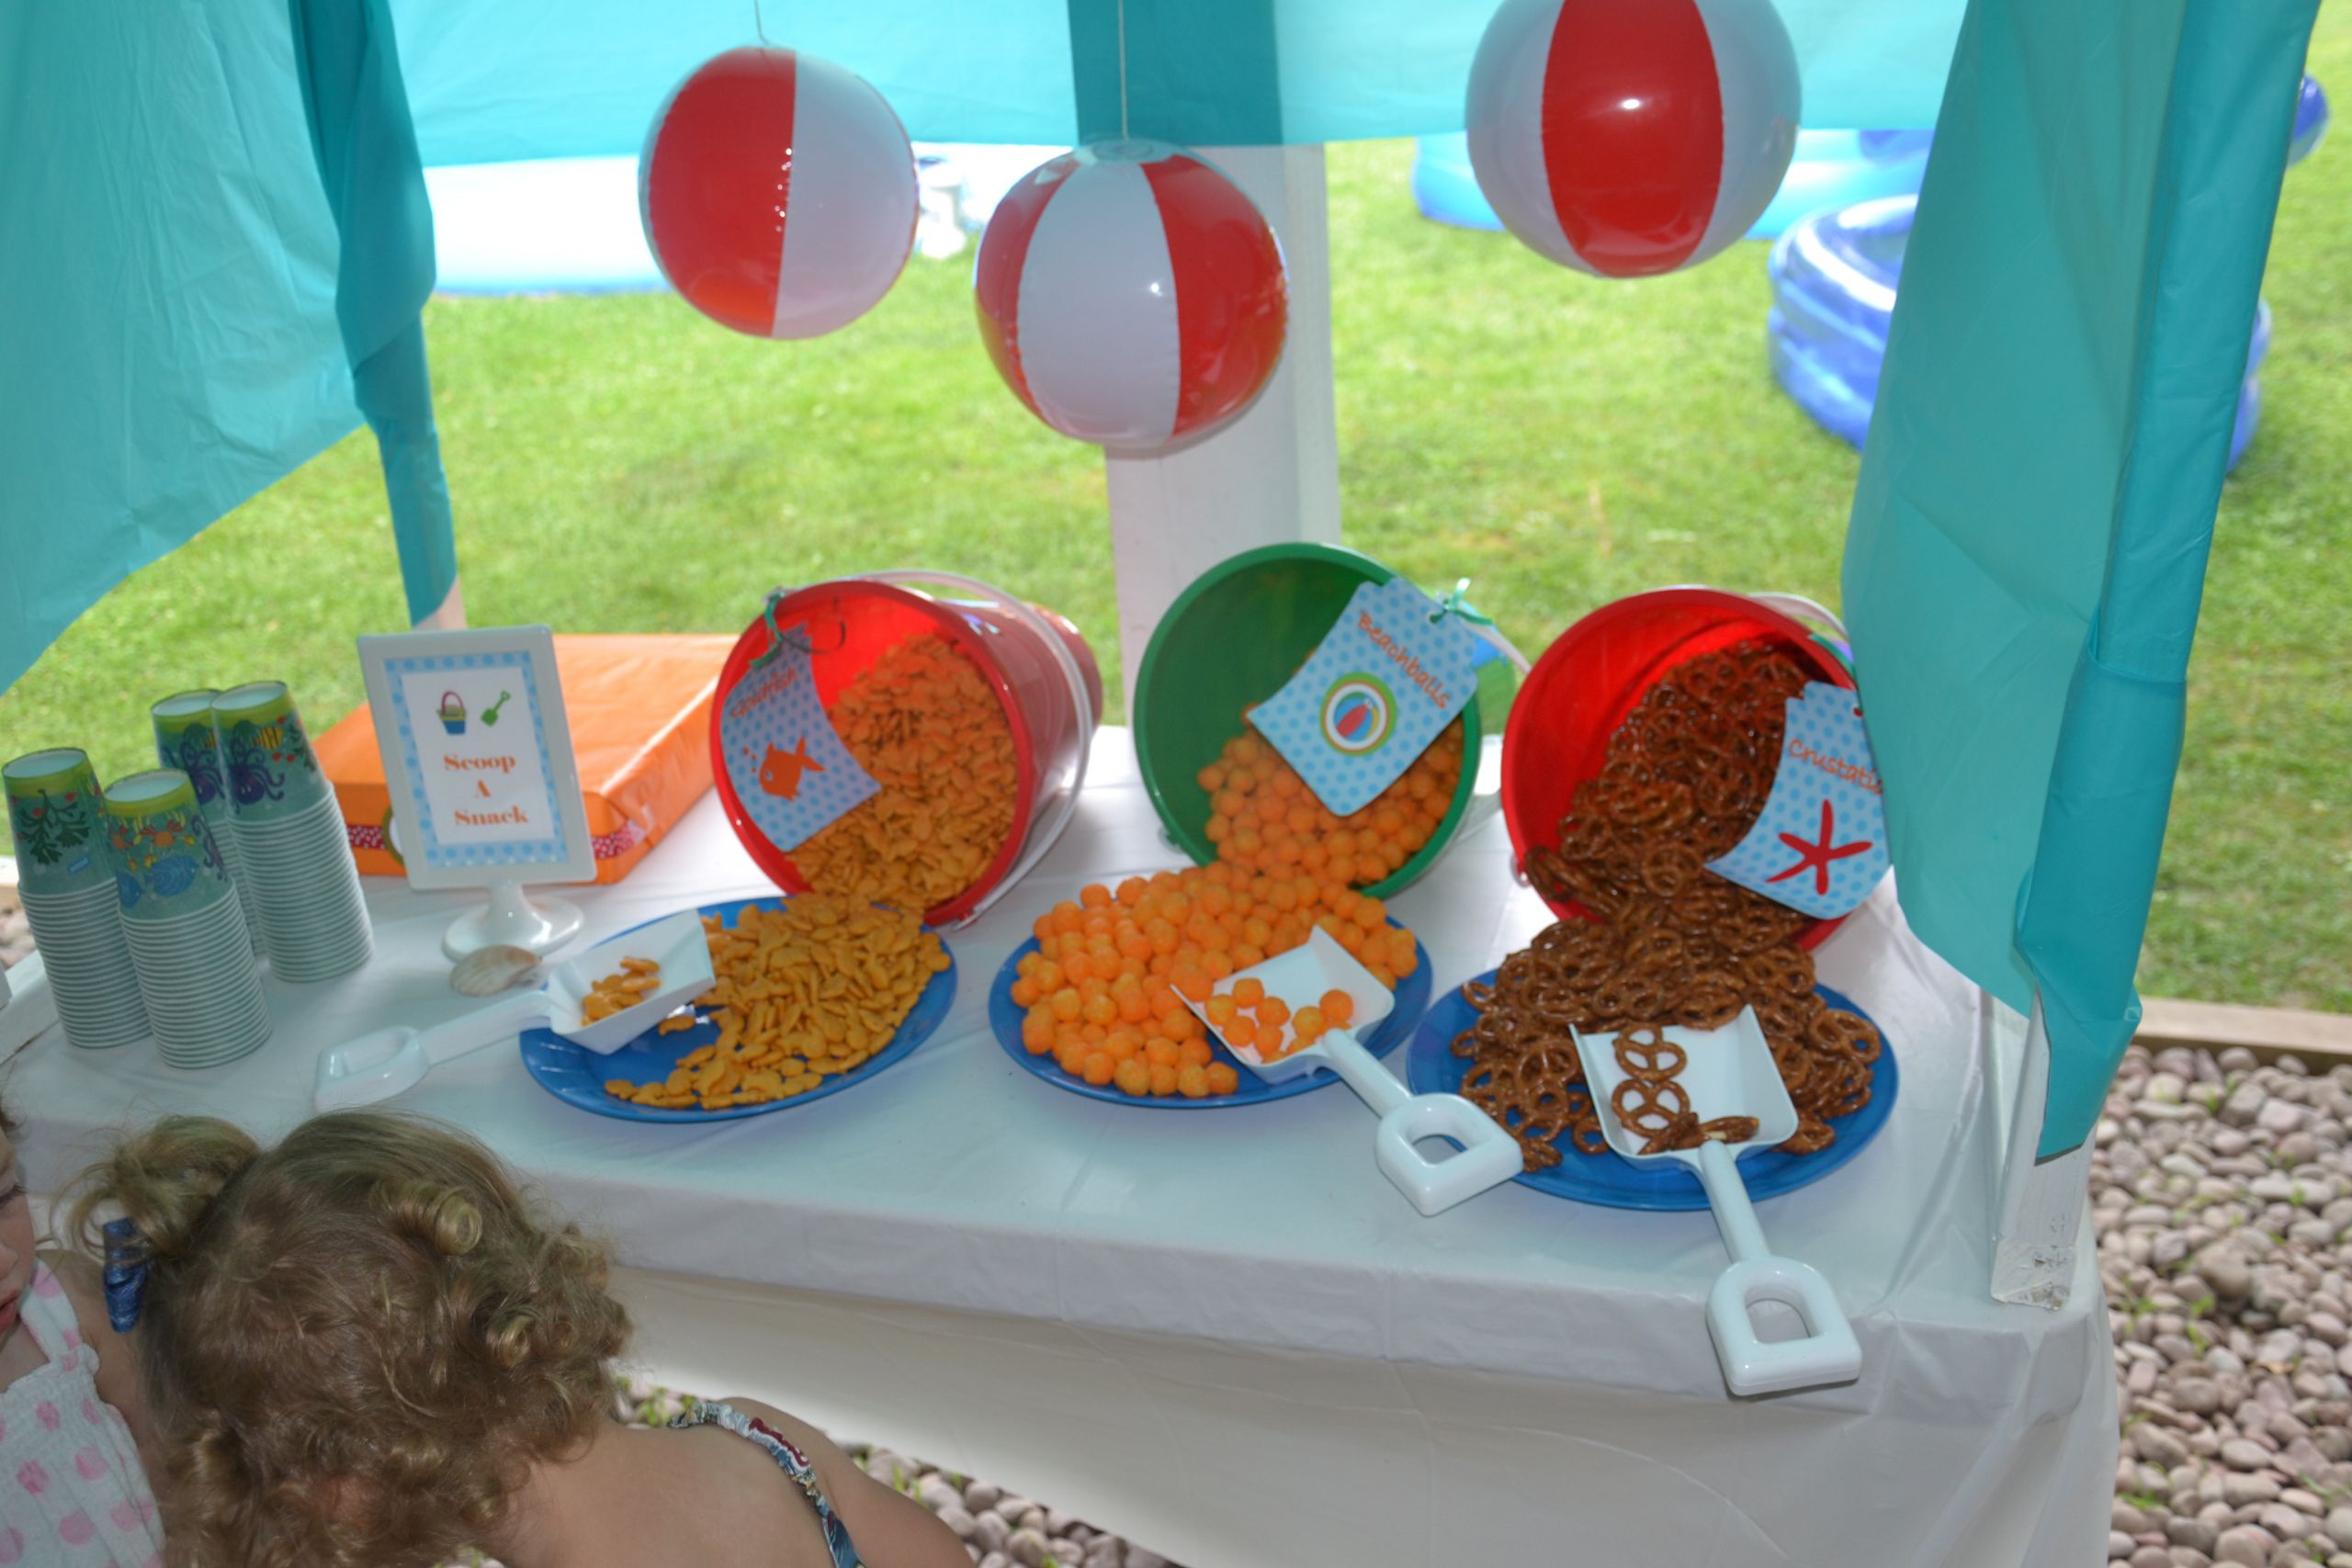 Kids Summer Party Food Ideas
 Party on a Bud  Ideas for Serving Summer Snacks